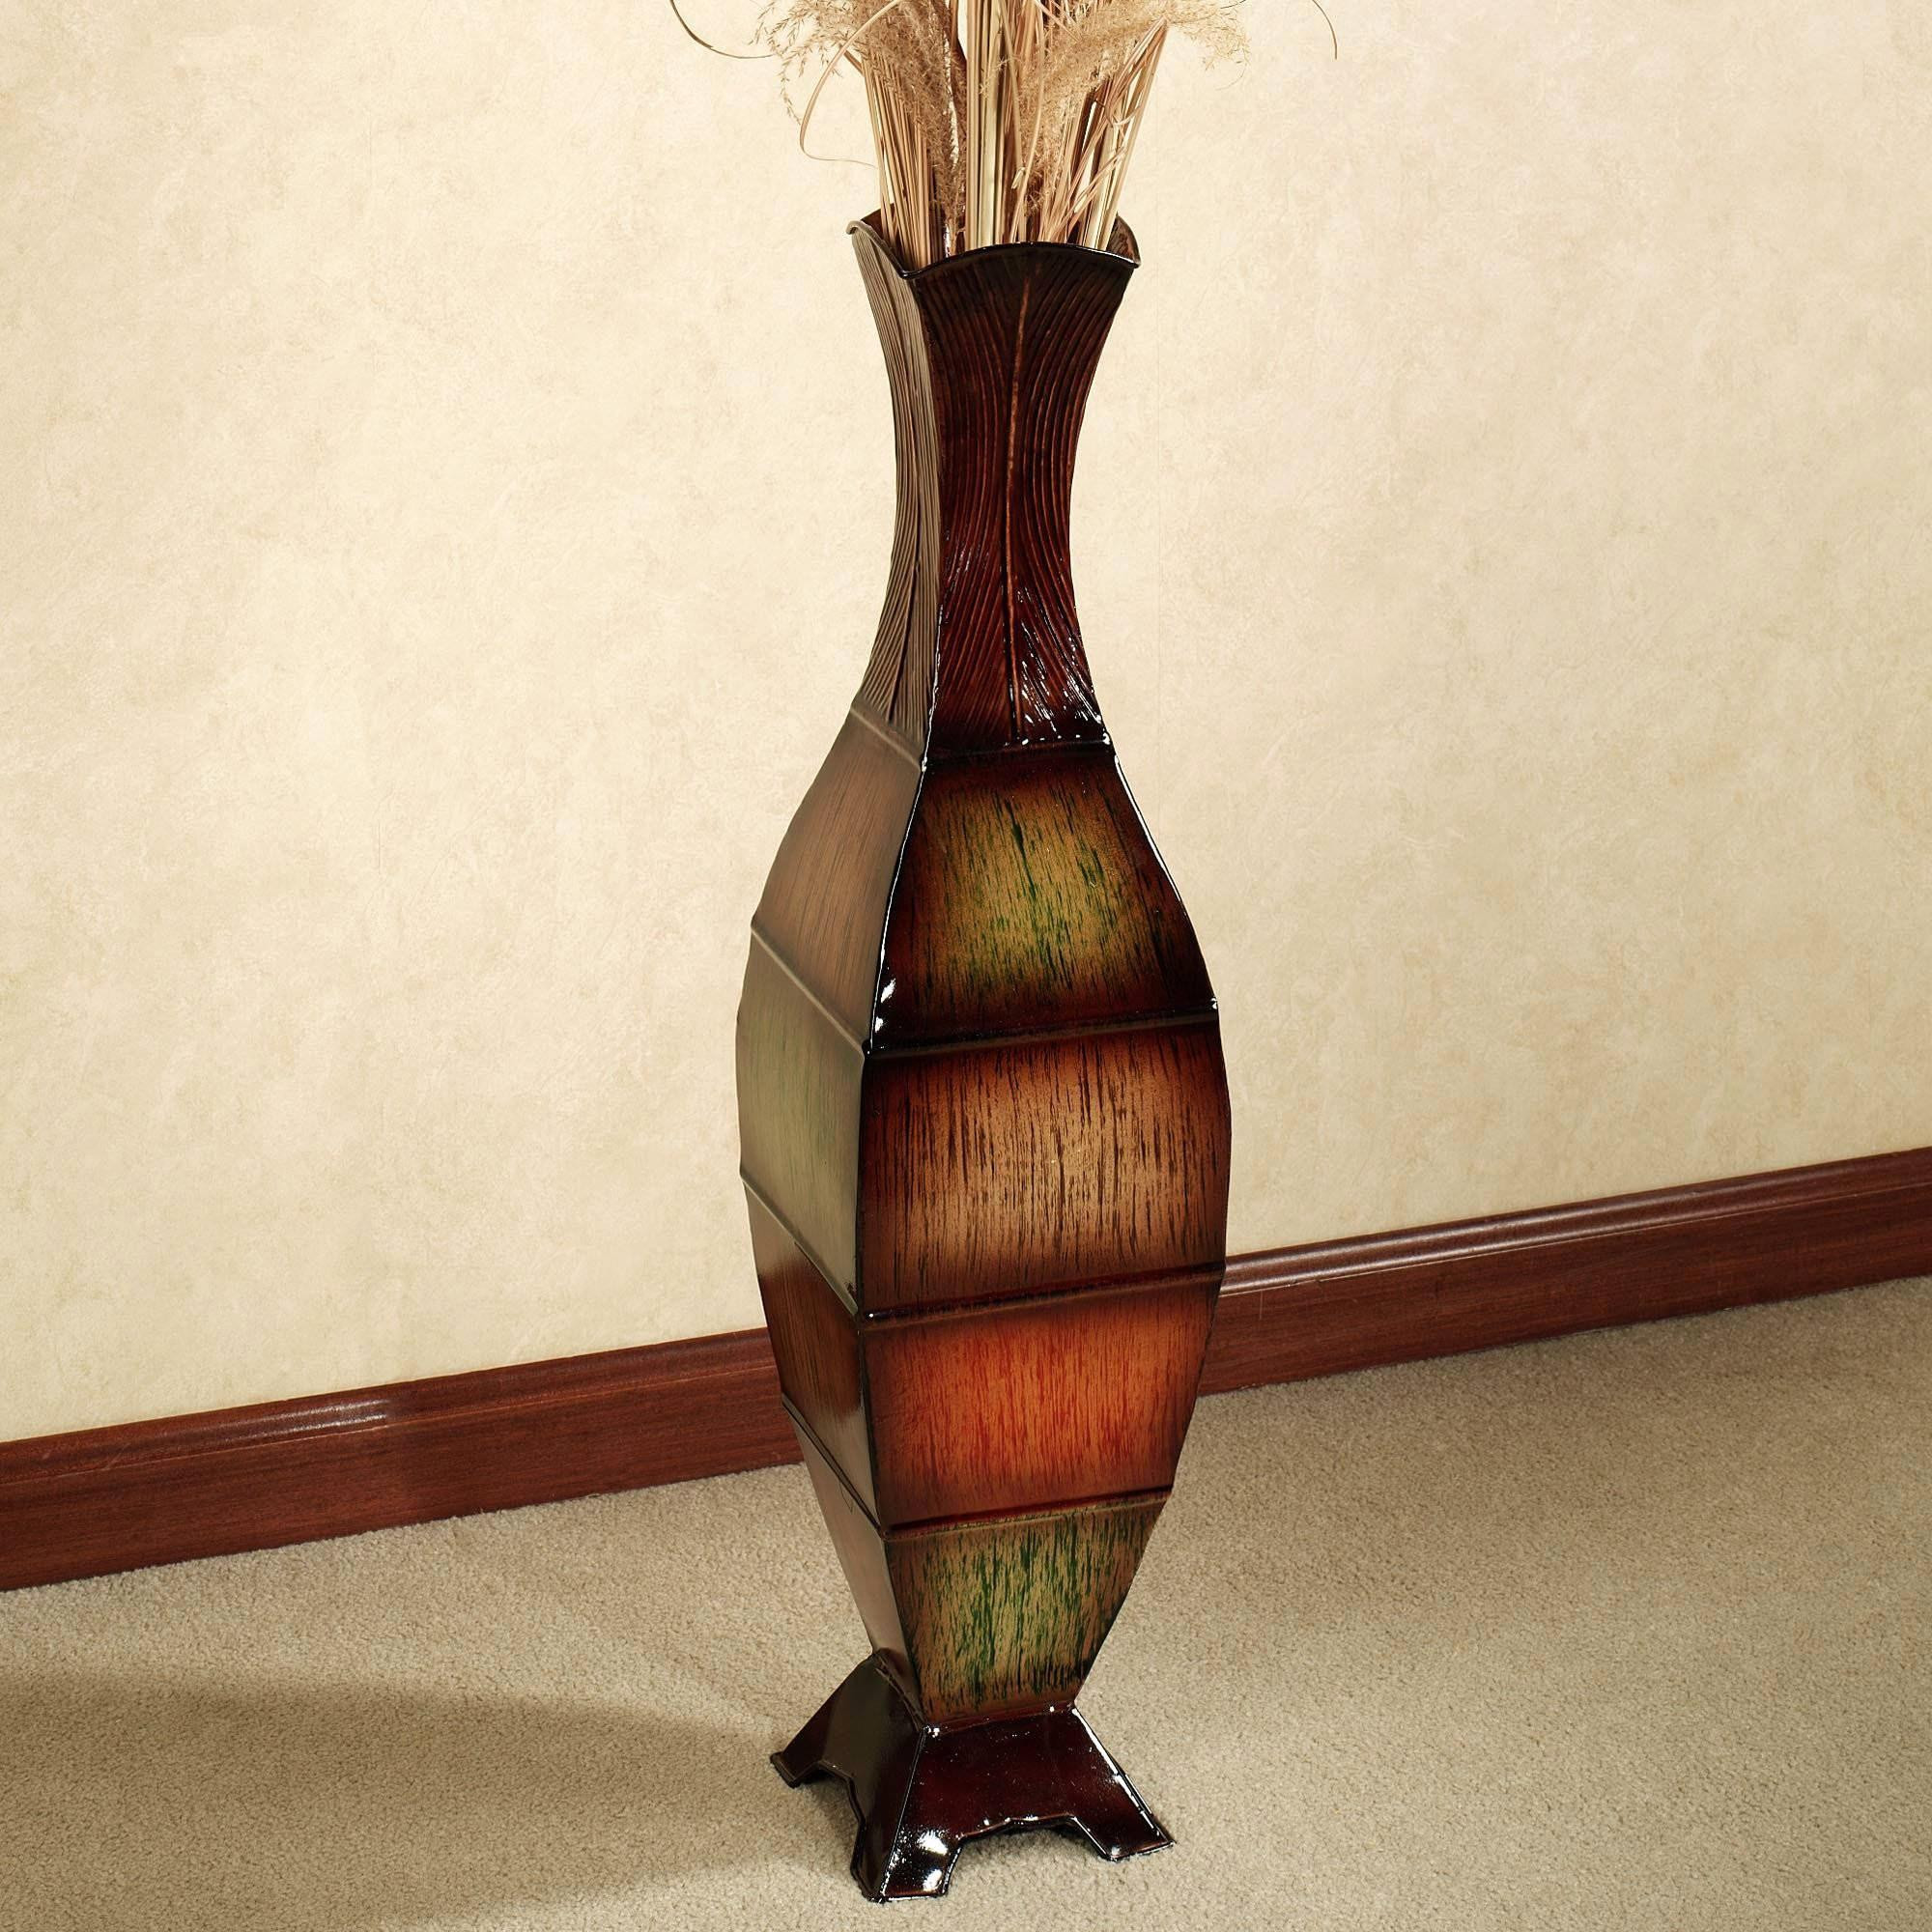 tall vases in bulk of living room vases wholesale new h vases big tall i 0d for cheap also in living room vases wholesale new h vases big tall i 0d for cheap also design of